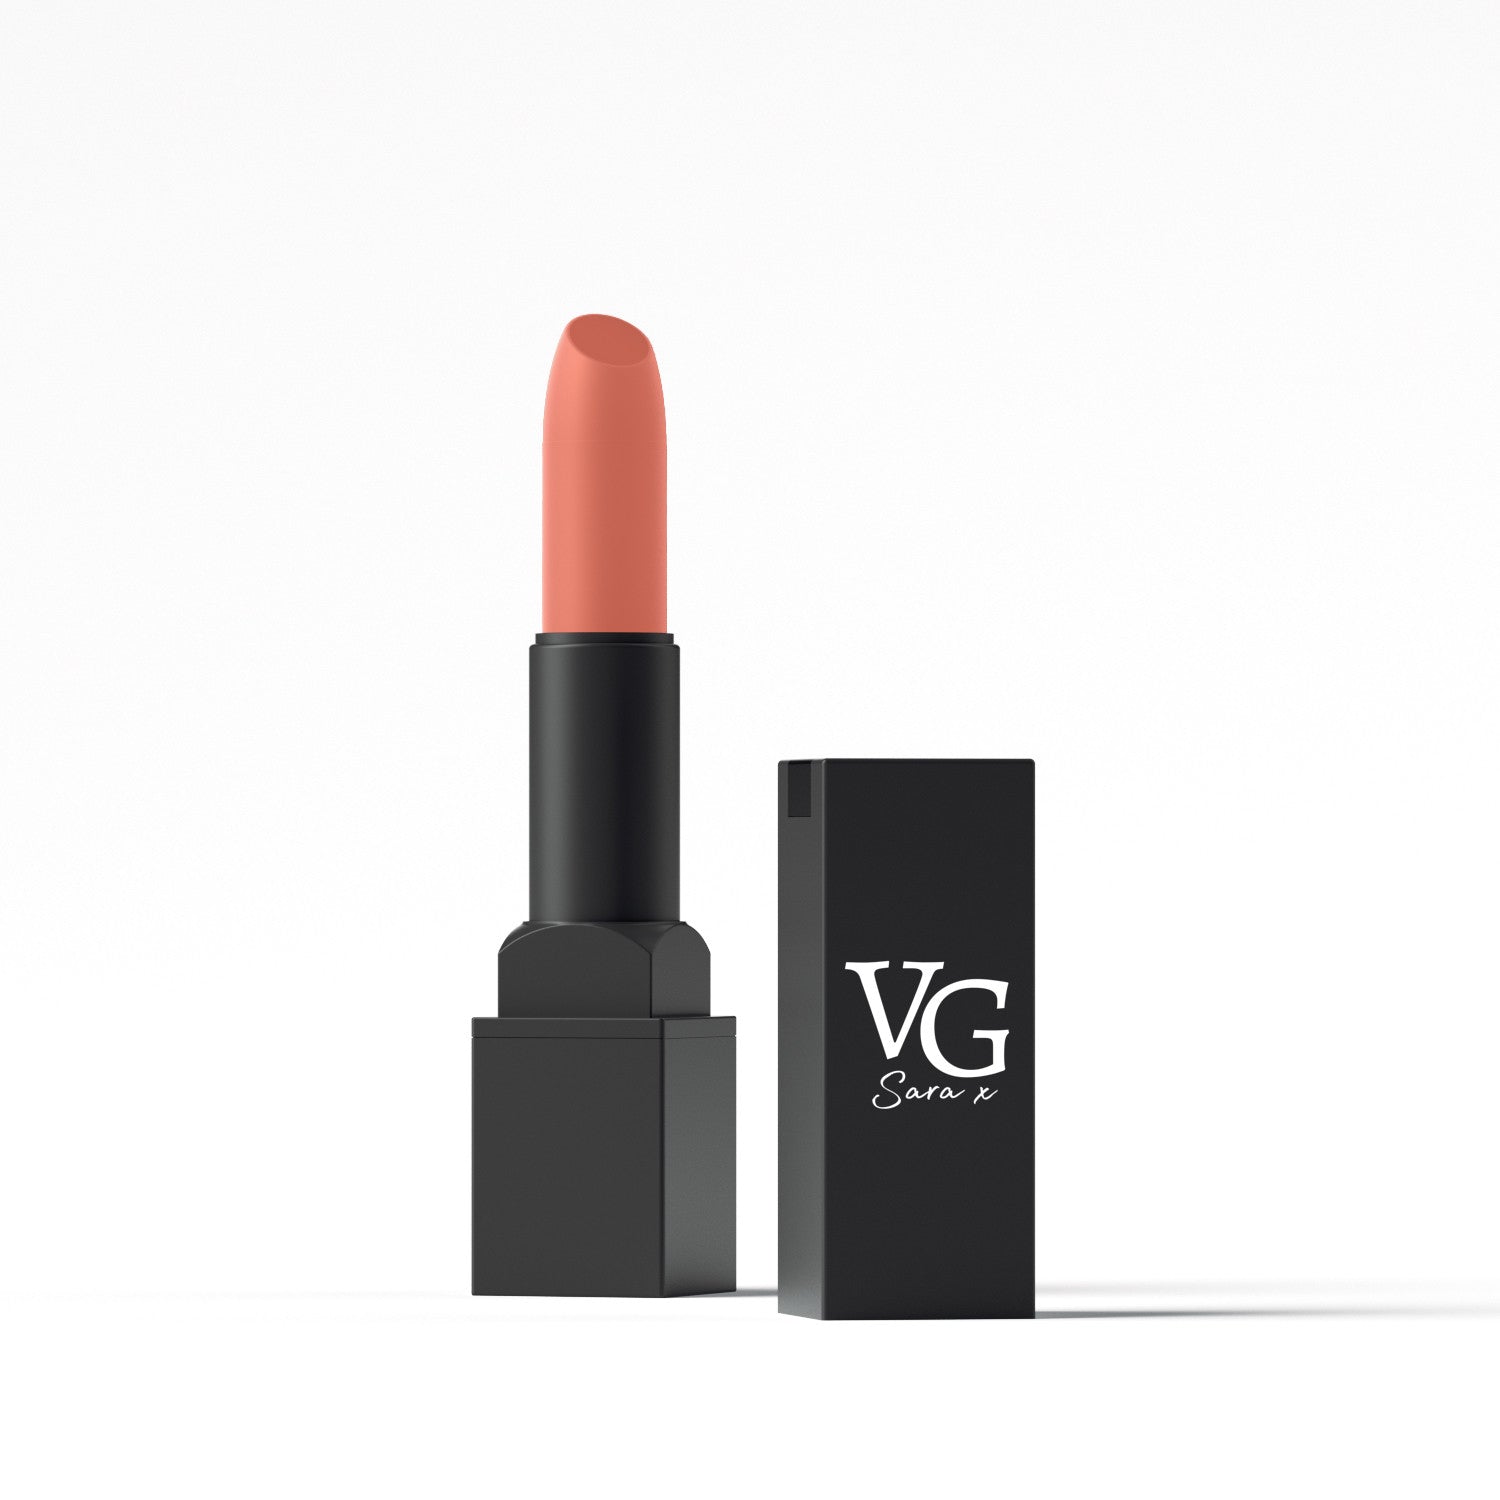 VG Cosmetics long-lasting lipstick beside its branded close-up